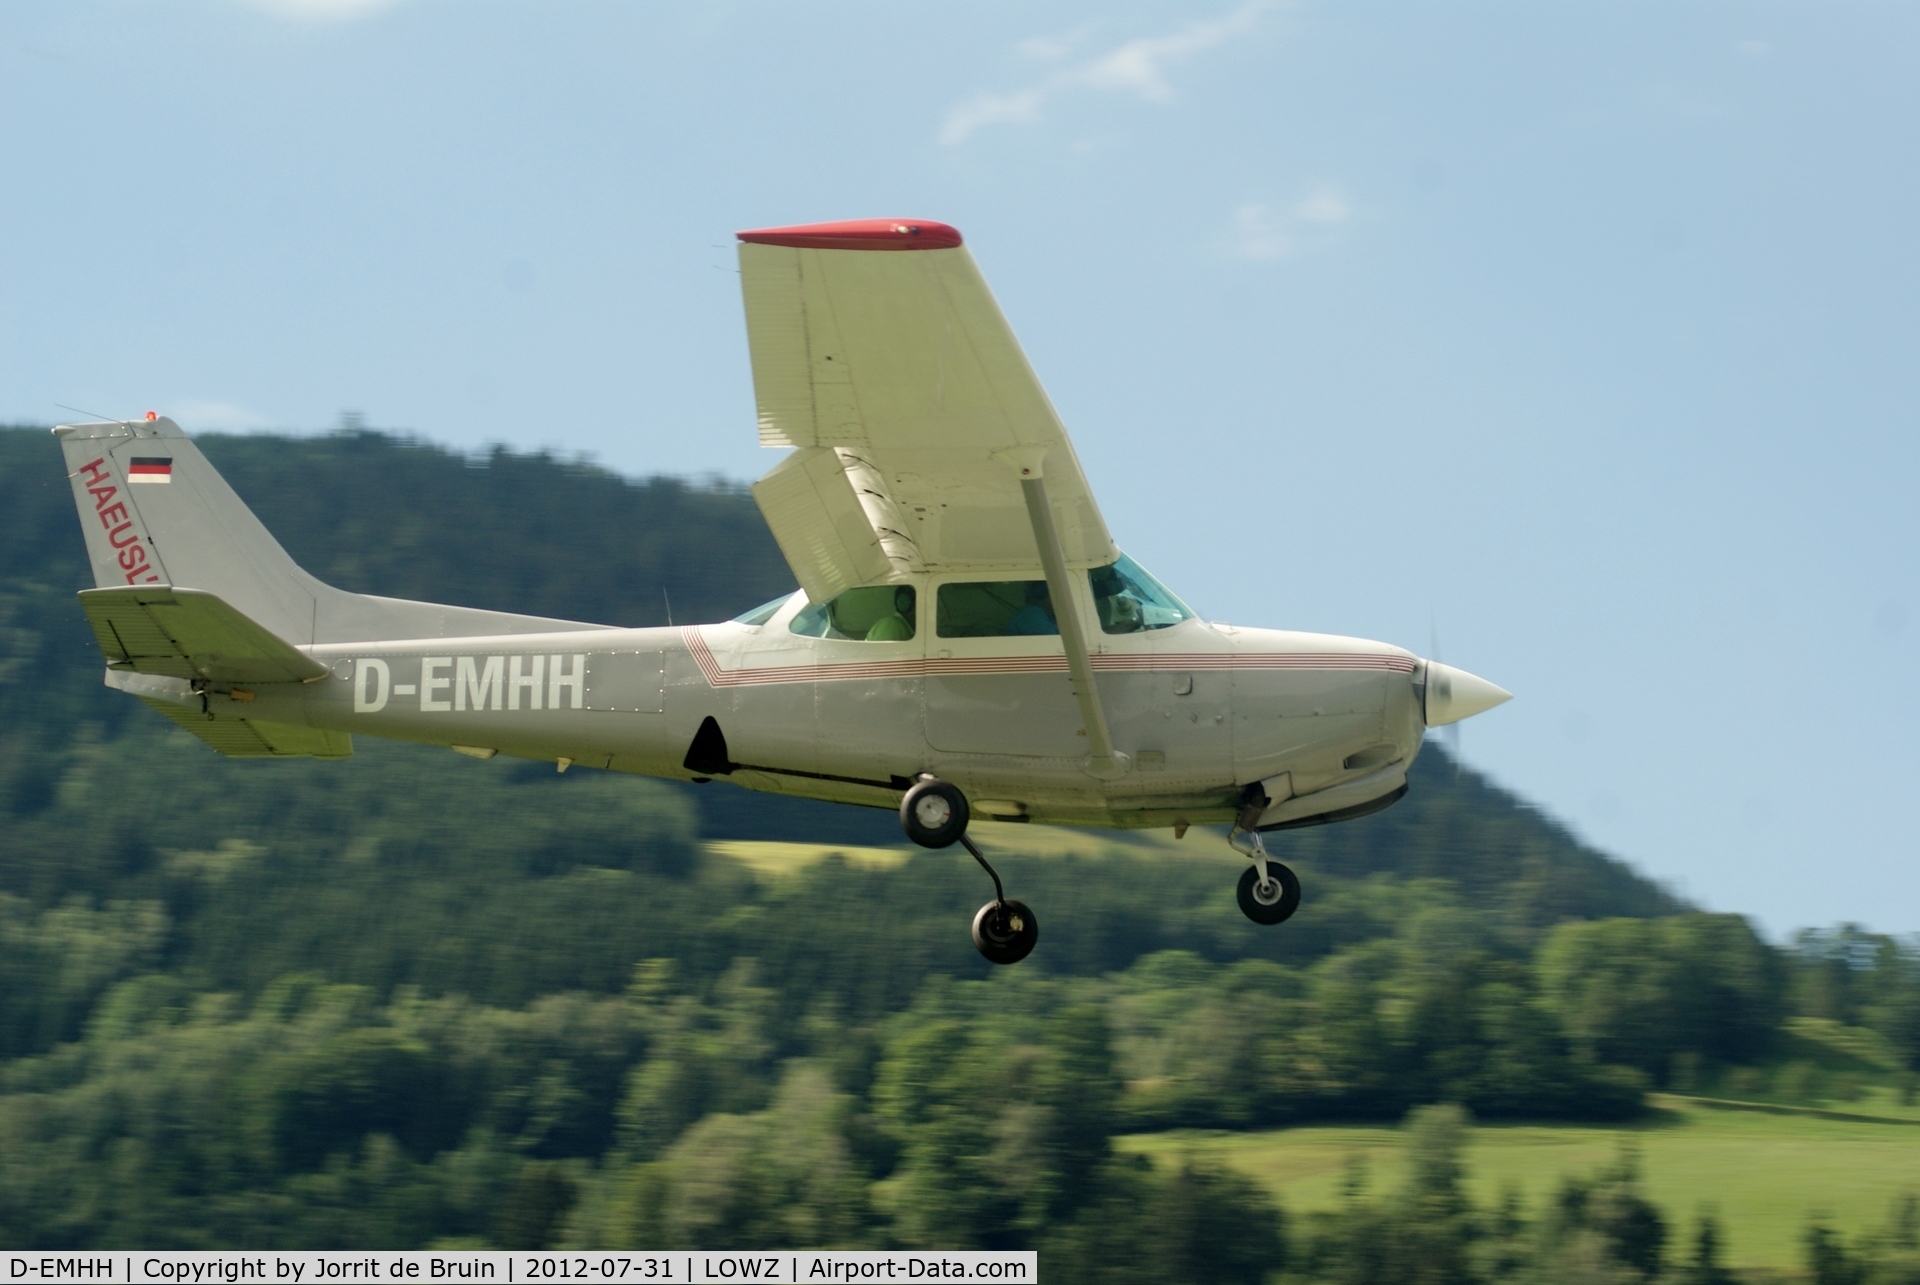 D-EMHH, 1980 Cessna 172RG Cutlass RG Cutlass RG C/N 172RG0198, A close picture of the landing D-EMHH. It is hanging right before the runway 08 at Zell am See.